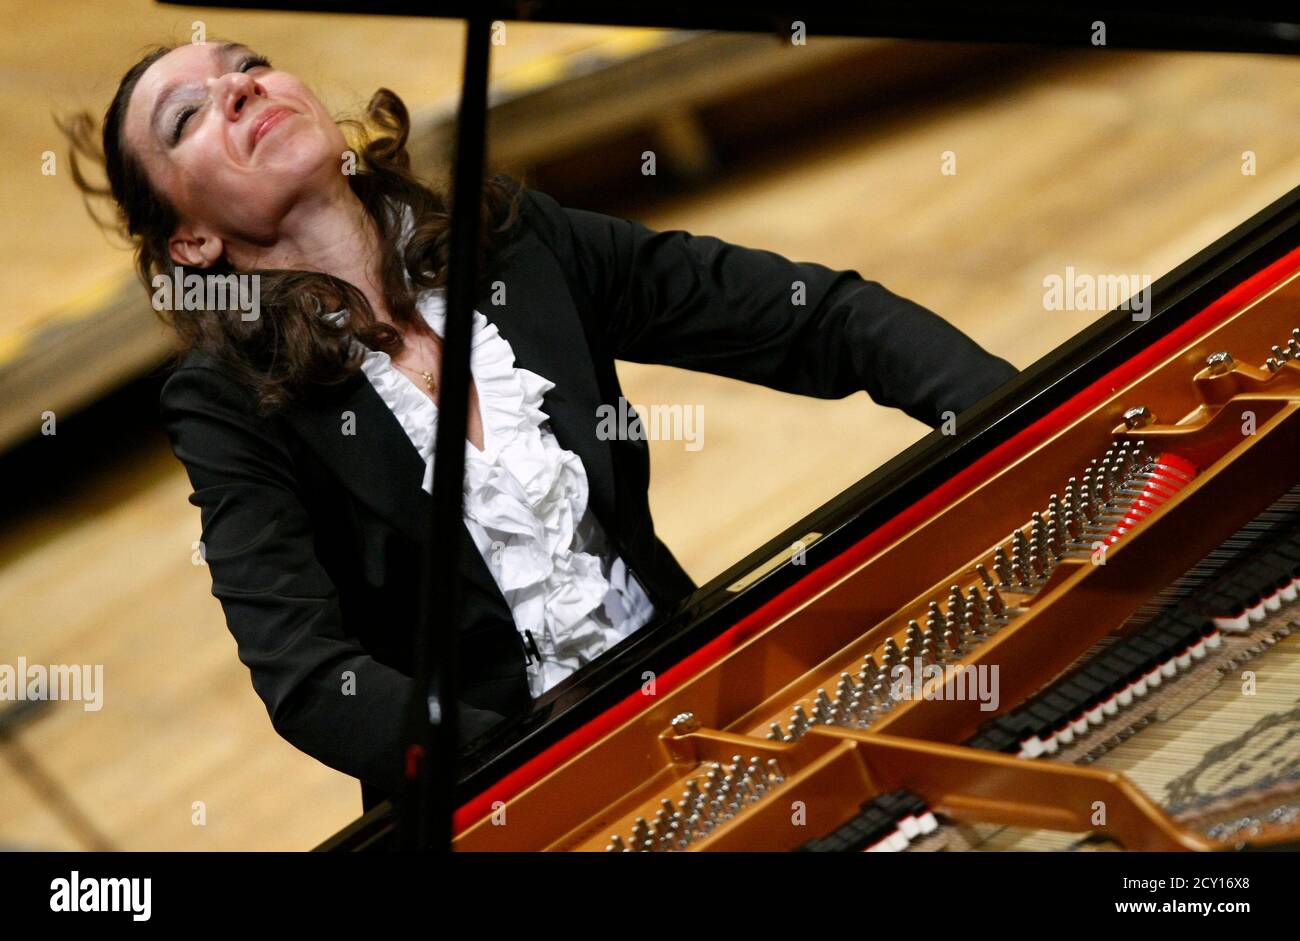 Yulianna Avdeeva of Russia, first prize winner, performs during concert of  the prize winners of the 16th International Fryderyk Chopin Piano  Competition at Warsaw Philharmonic October 22, 2010. REUTERS/Kacper Pempel  (POLAND -